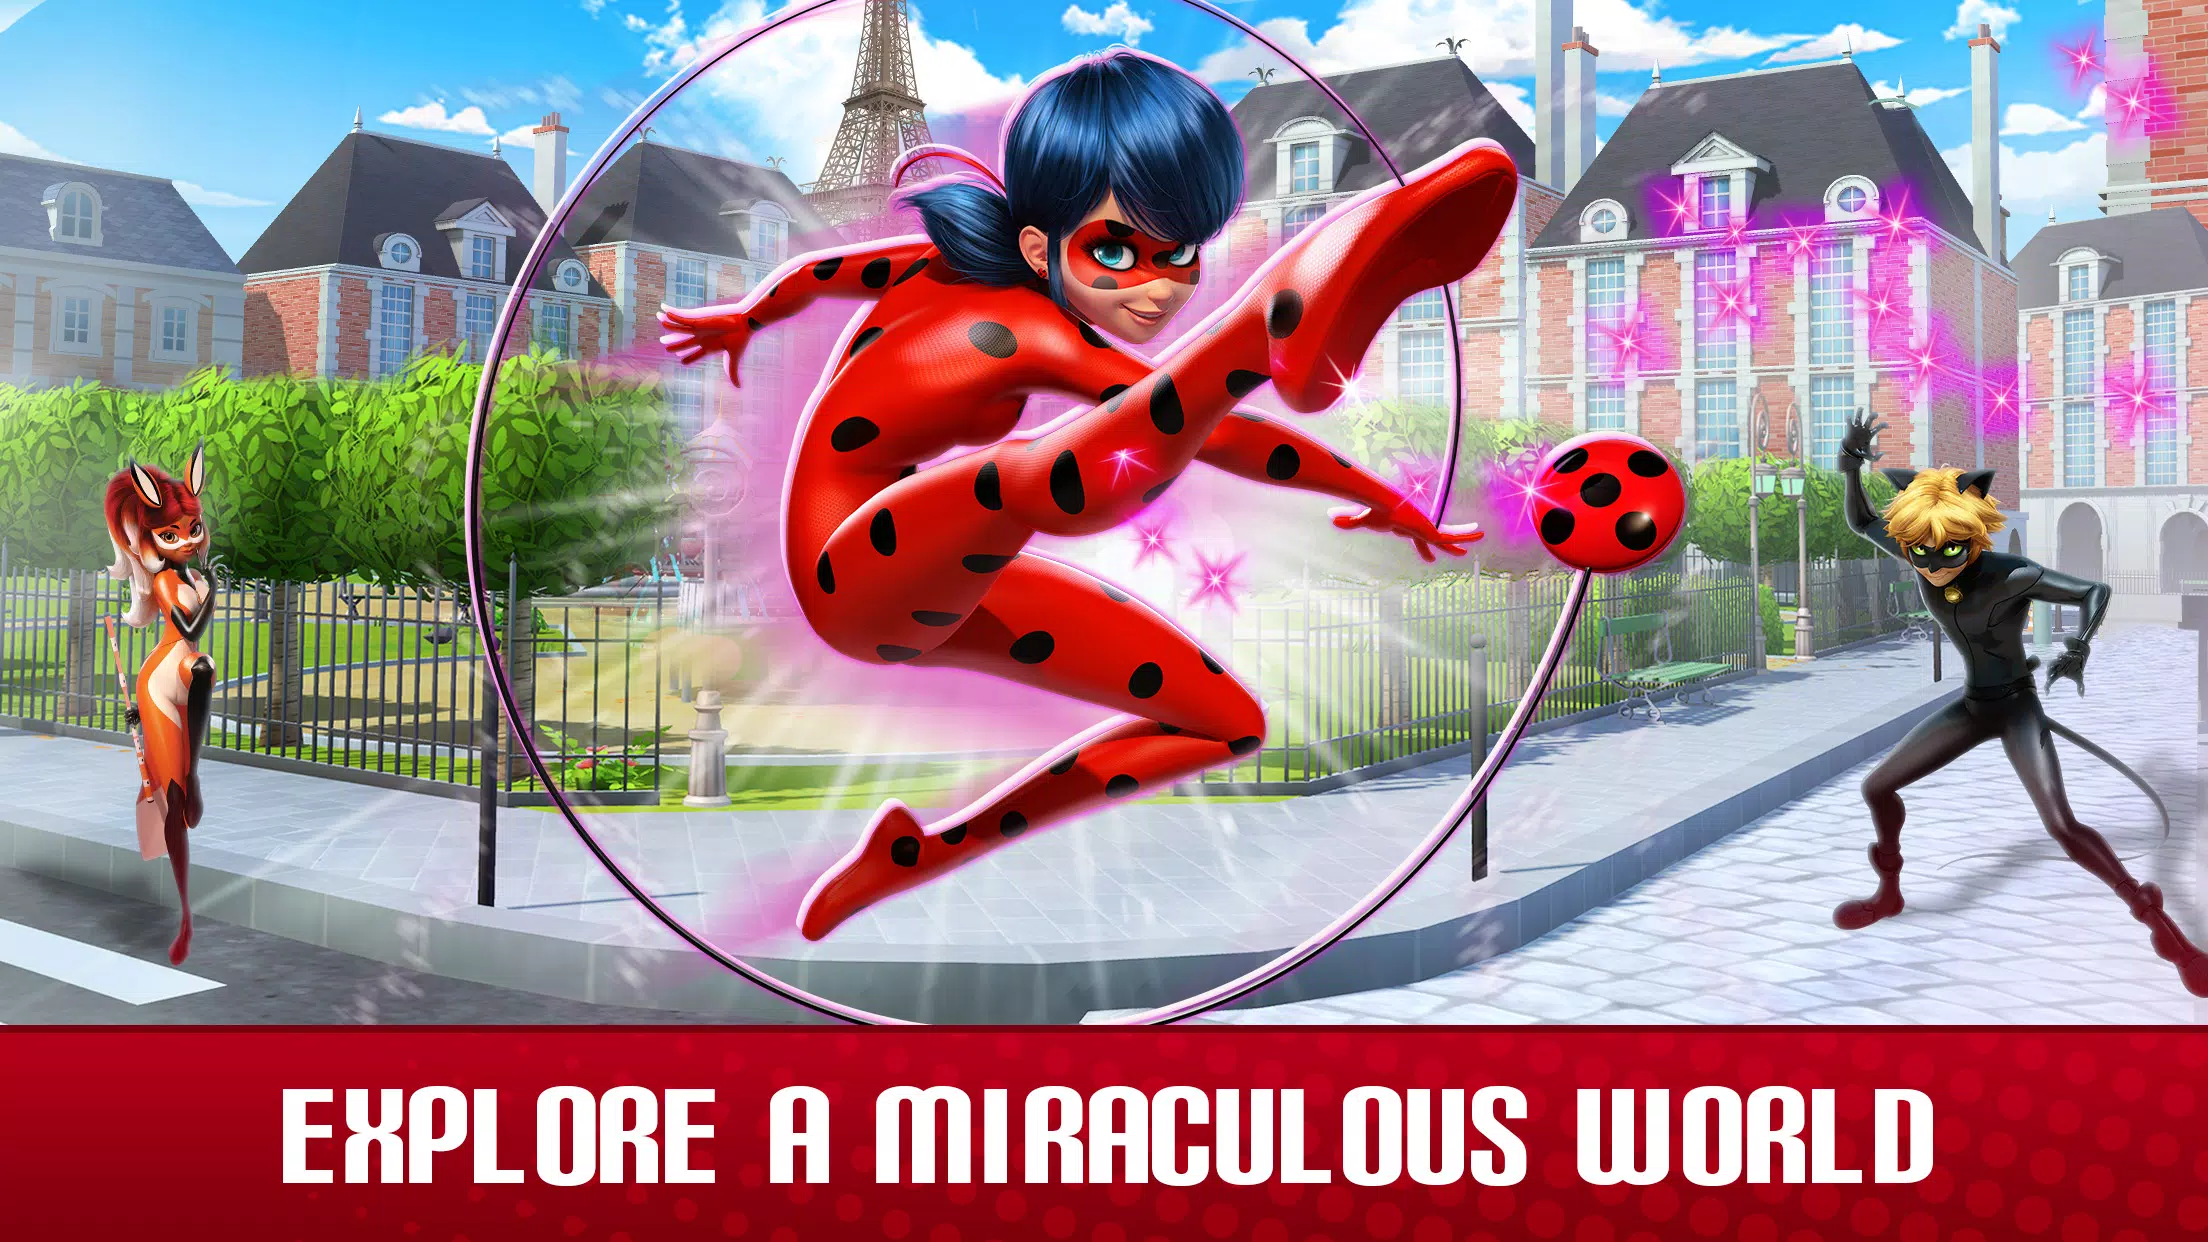 Download Miraculous Ladybug & Cat Noir for android 6.0.1